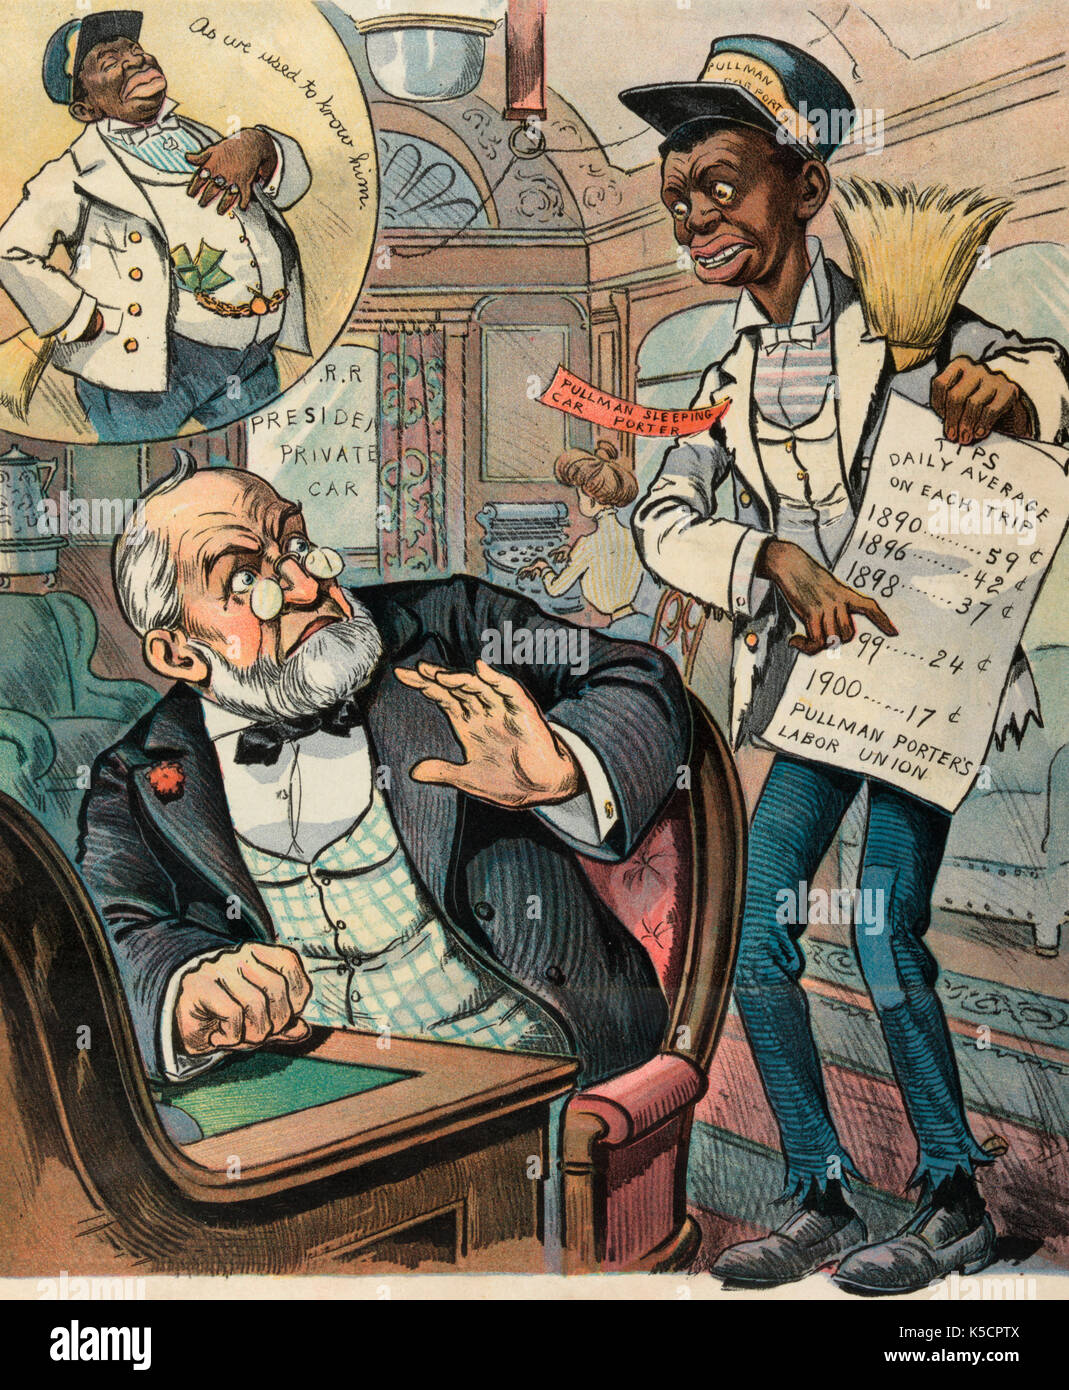 The Pullman porter's 'kick' - Illustration shows a thin, tattered 'Pullman Sleeping Car Porter' holding a piece of paper 'Tips Daily Average on each Trip' which shows a 70% reduction in tips between 1890 and 1900, at the bottom it states 'Pullman Porter's Labor Union.' He is appealing to the president of the railroad company to become a salaried employee. An insert shows the Pullman porter 'As we used to know him,' plump, with his pockets stuffed with cash and with rings on his fingers. Political Cartoon, circa 1901 Stock Photo